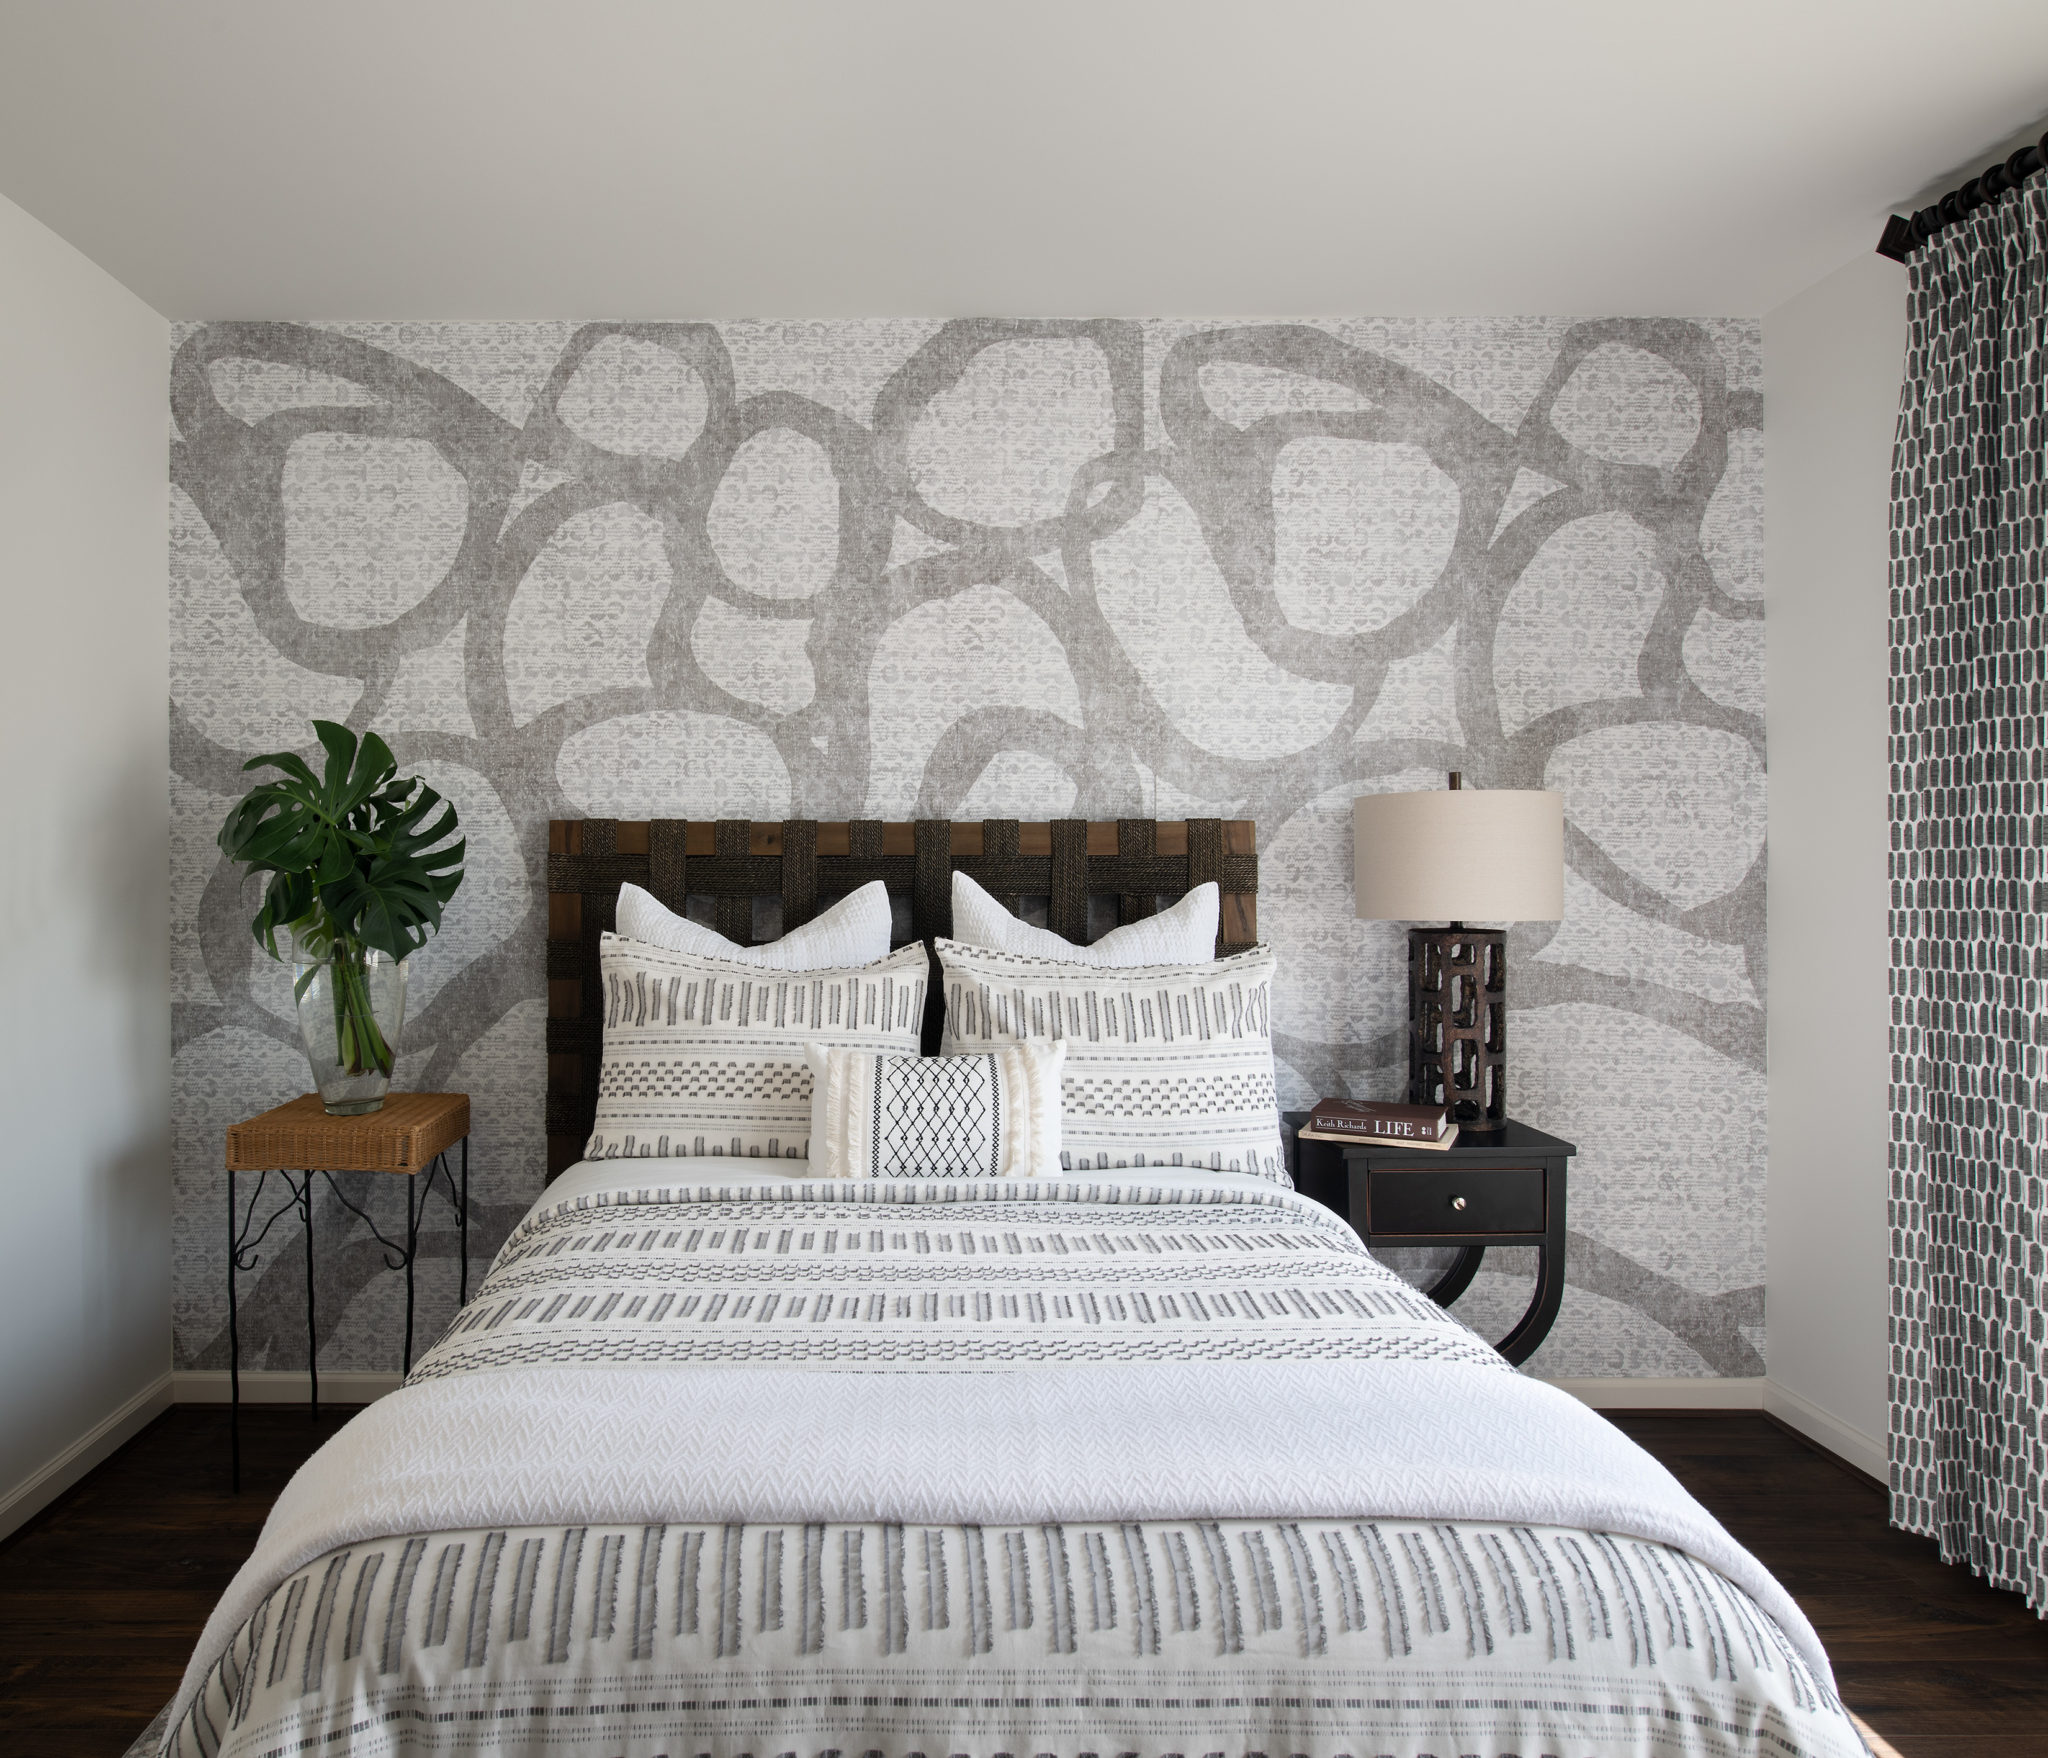 A richly textured guest bedroom